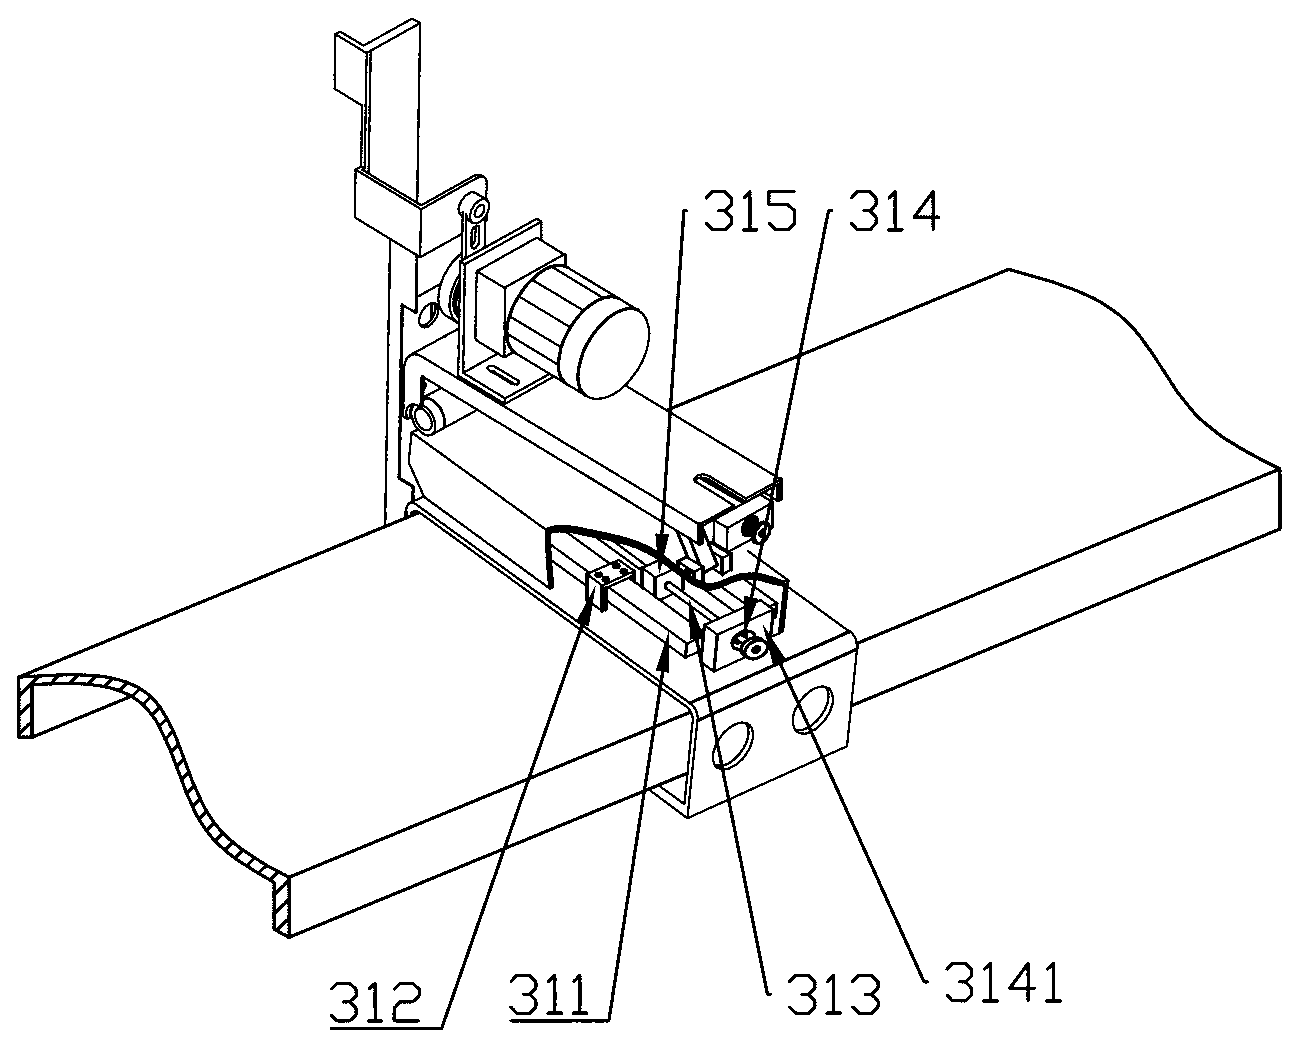 Automatic wall trowelling machine with function of automatic adjustment of scraper angle